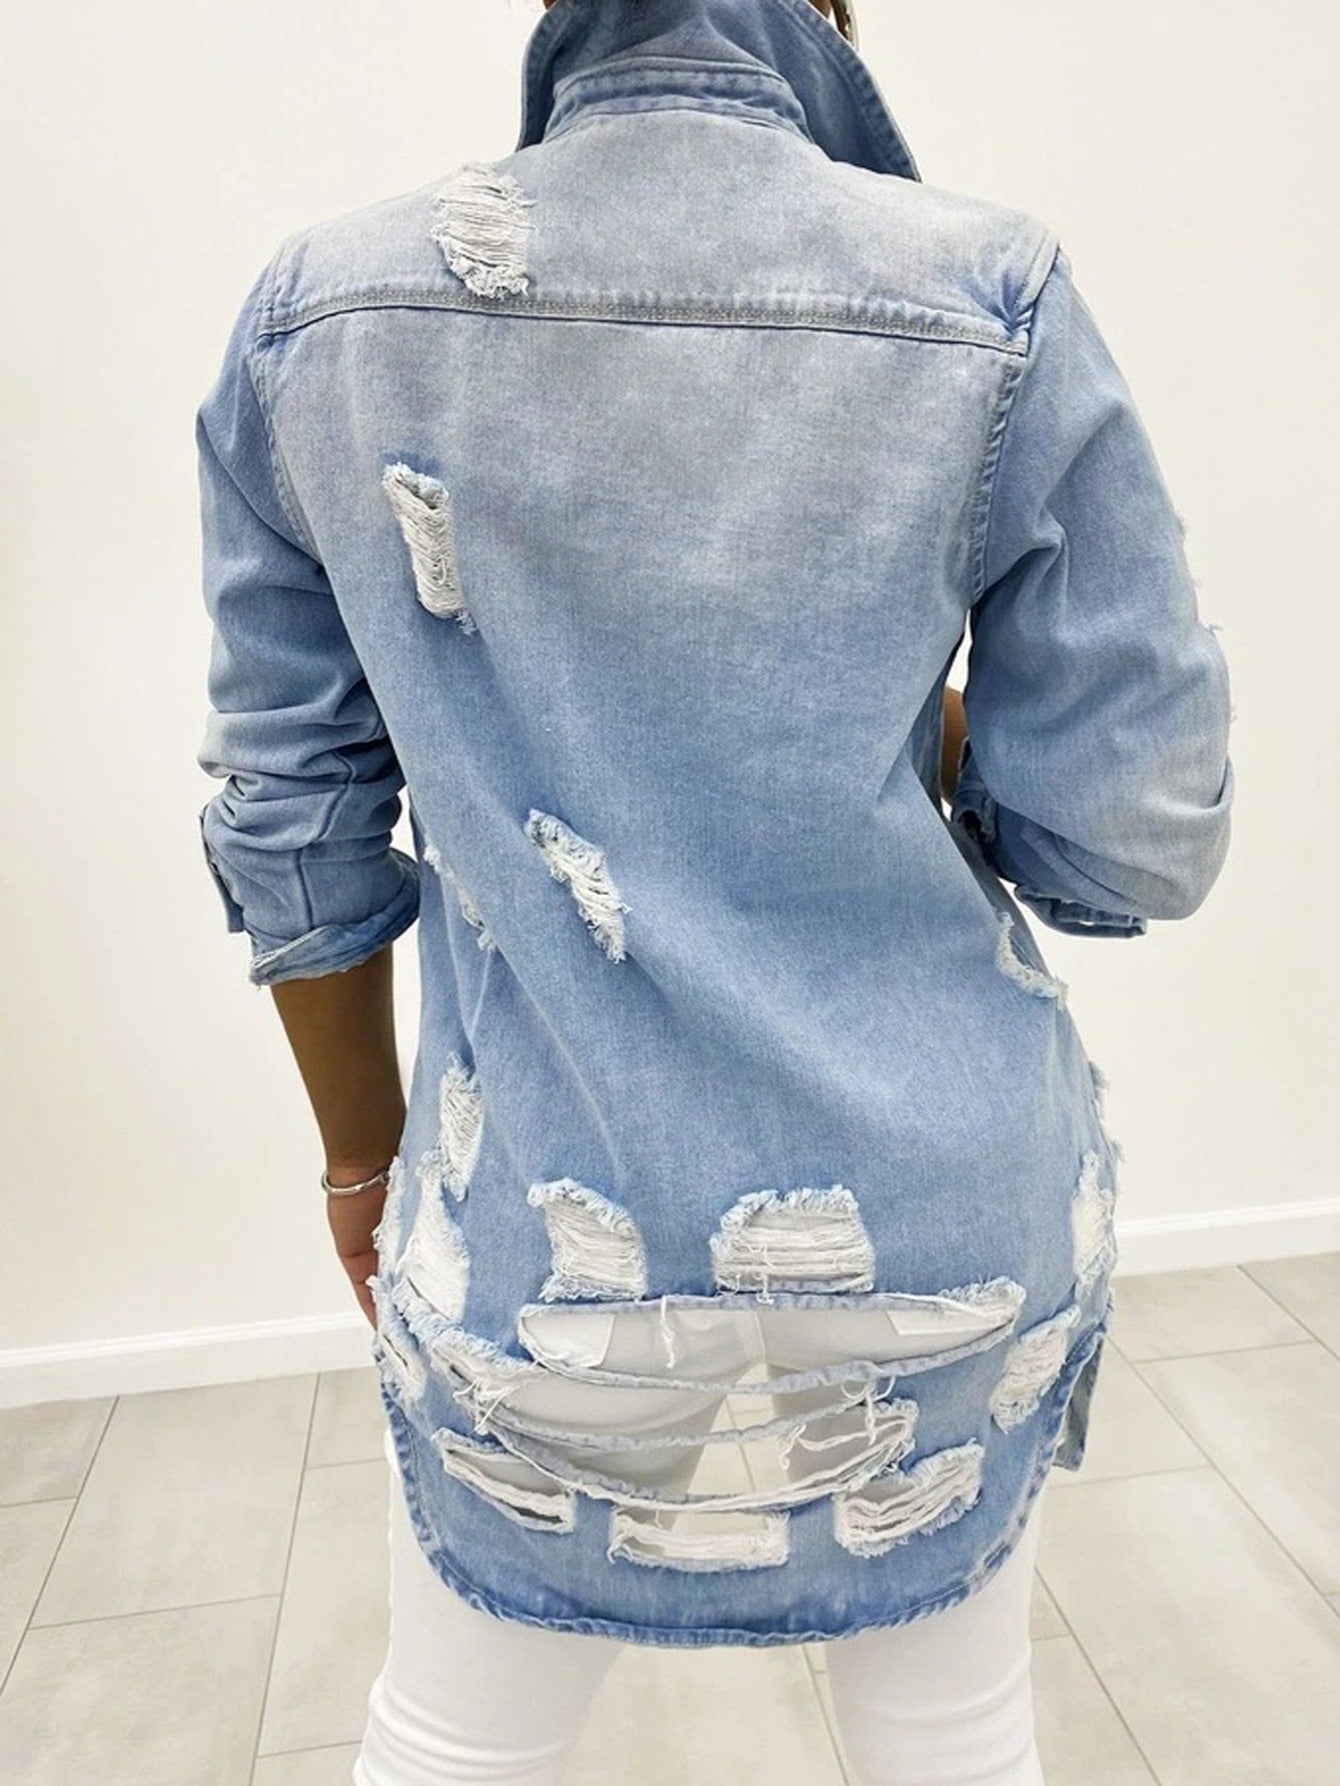 Lovevop-Distressed Denim Jacket, Long Button Up Ripped Jean Jacket Top, Women's Clothing & Outerwear